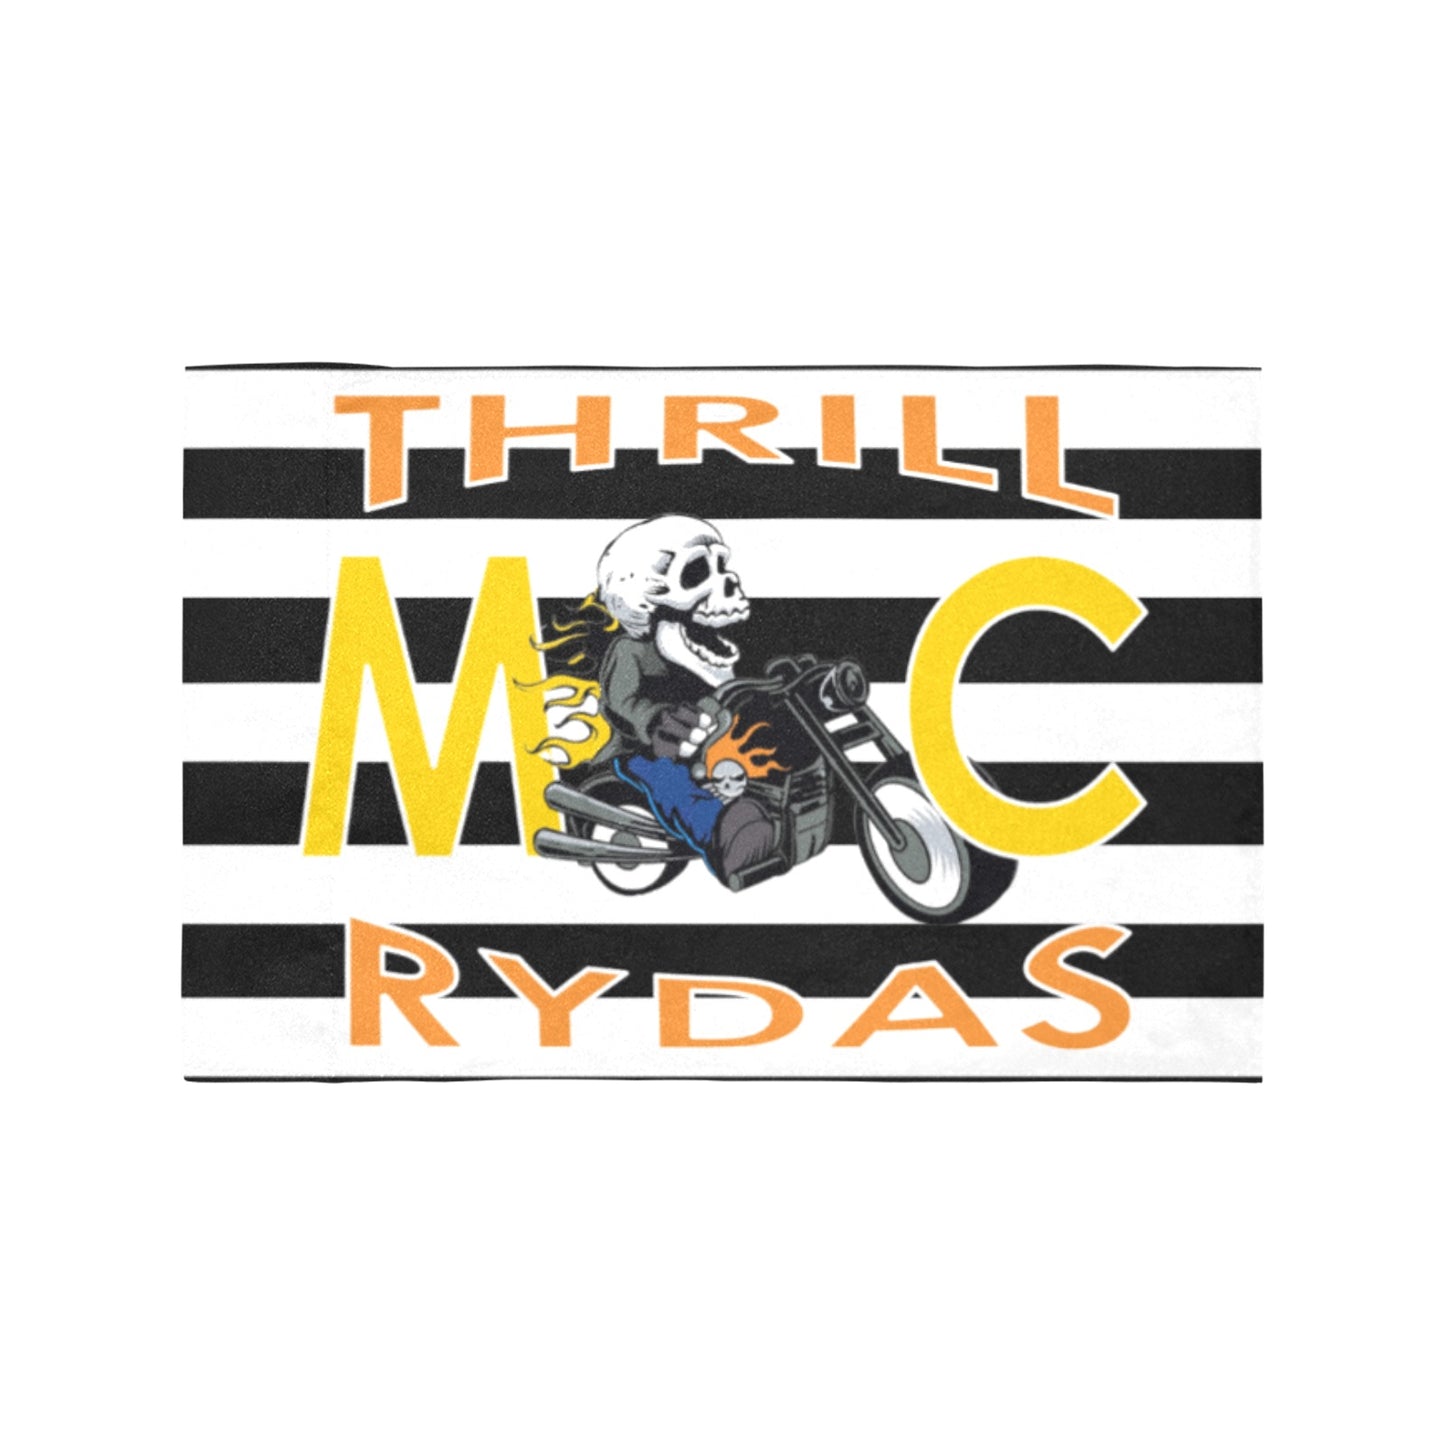 THRILL RYDAS Motorcycle Flag 2 (Twin Sides)